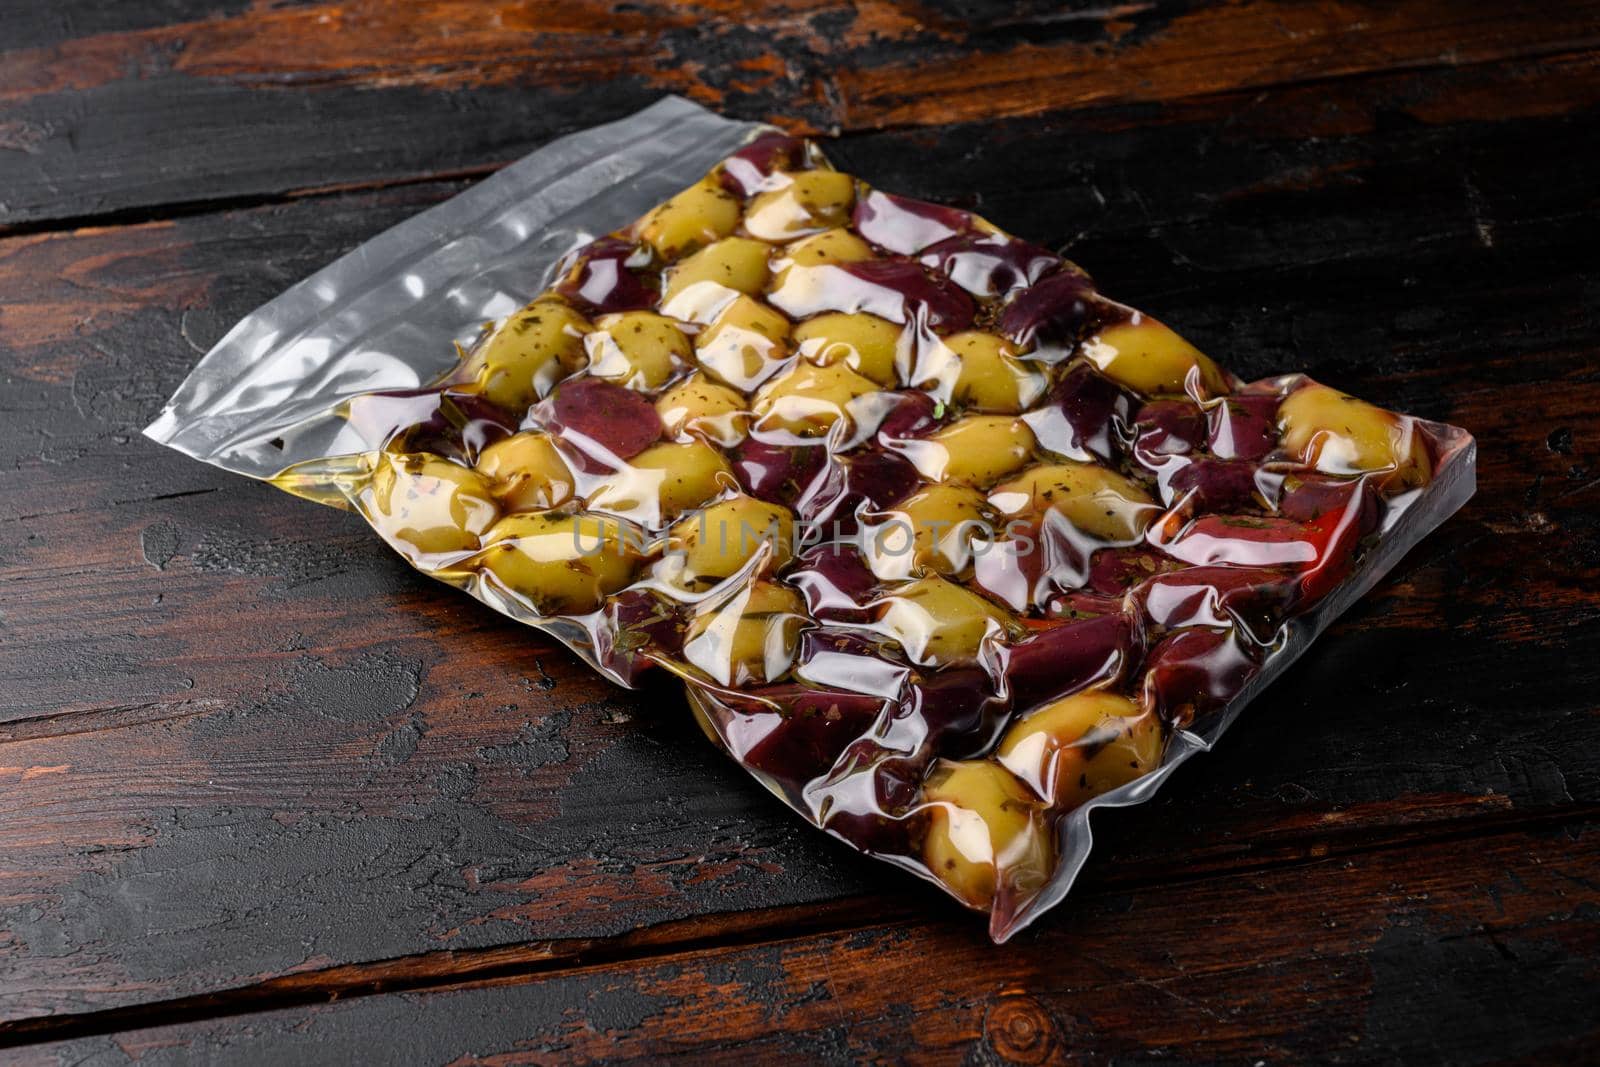 Pickled Olives in Vacuum Sealed Bag, on old dark wooden table background by Ilianesolenyi